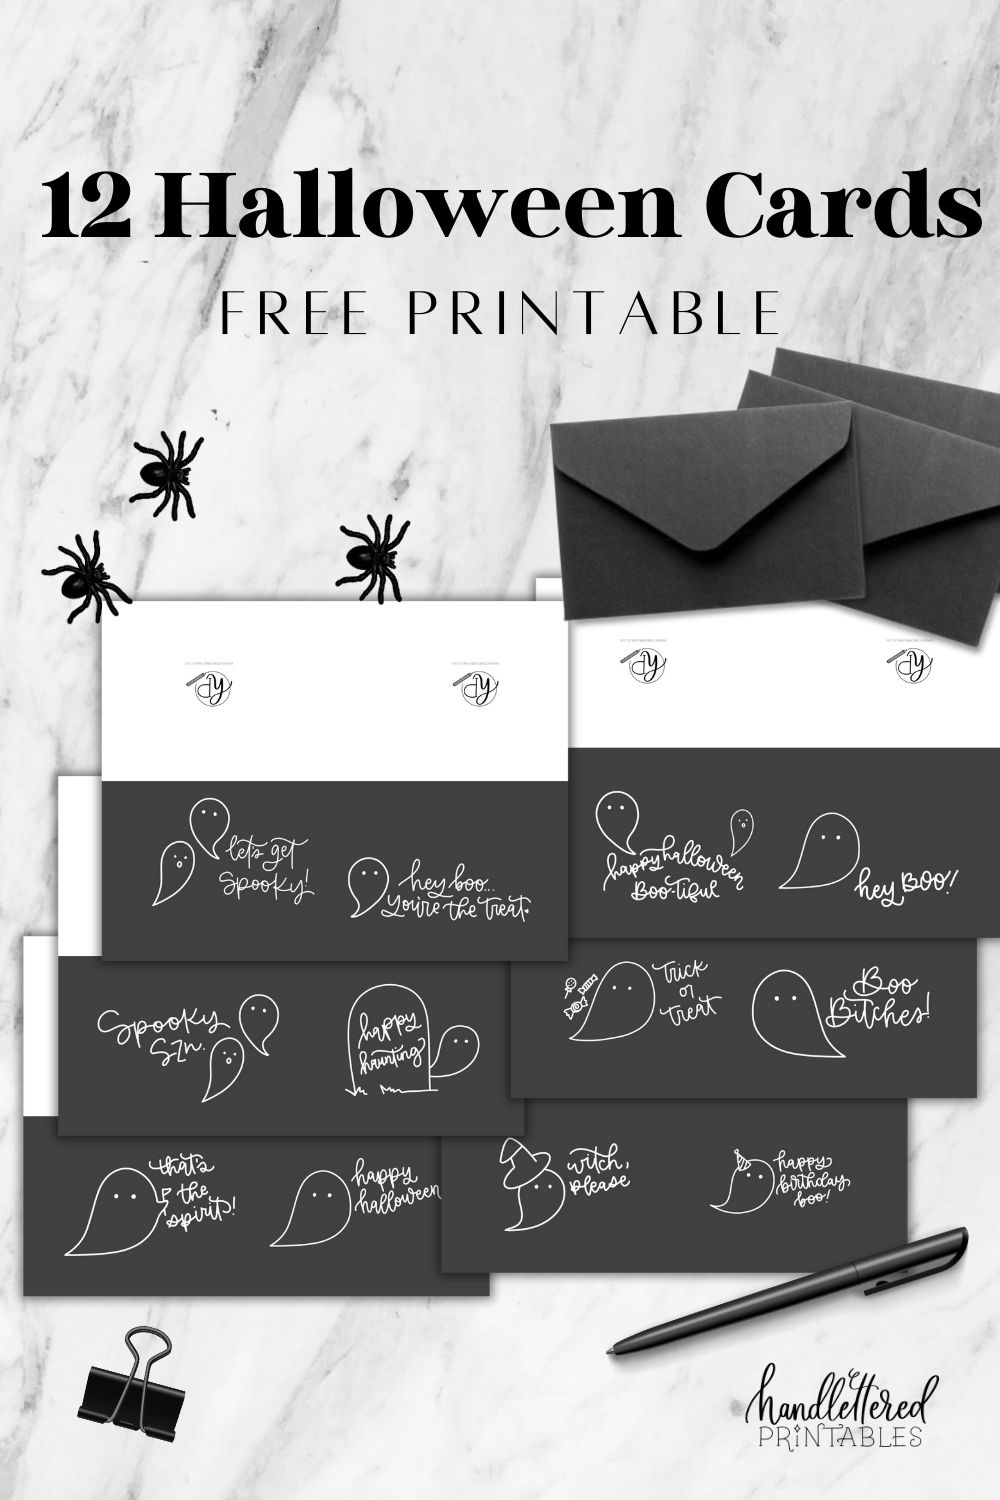 Free Printable halloween cards with line art ghosts and hand lettered happy halloween greetings